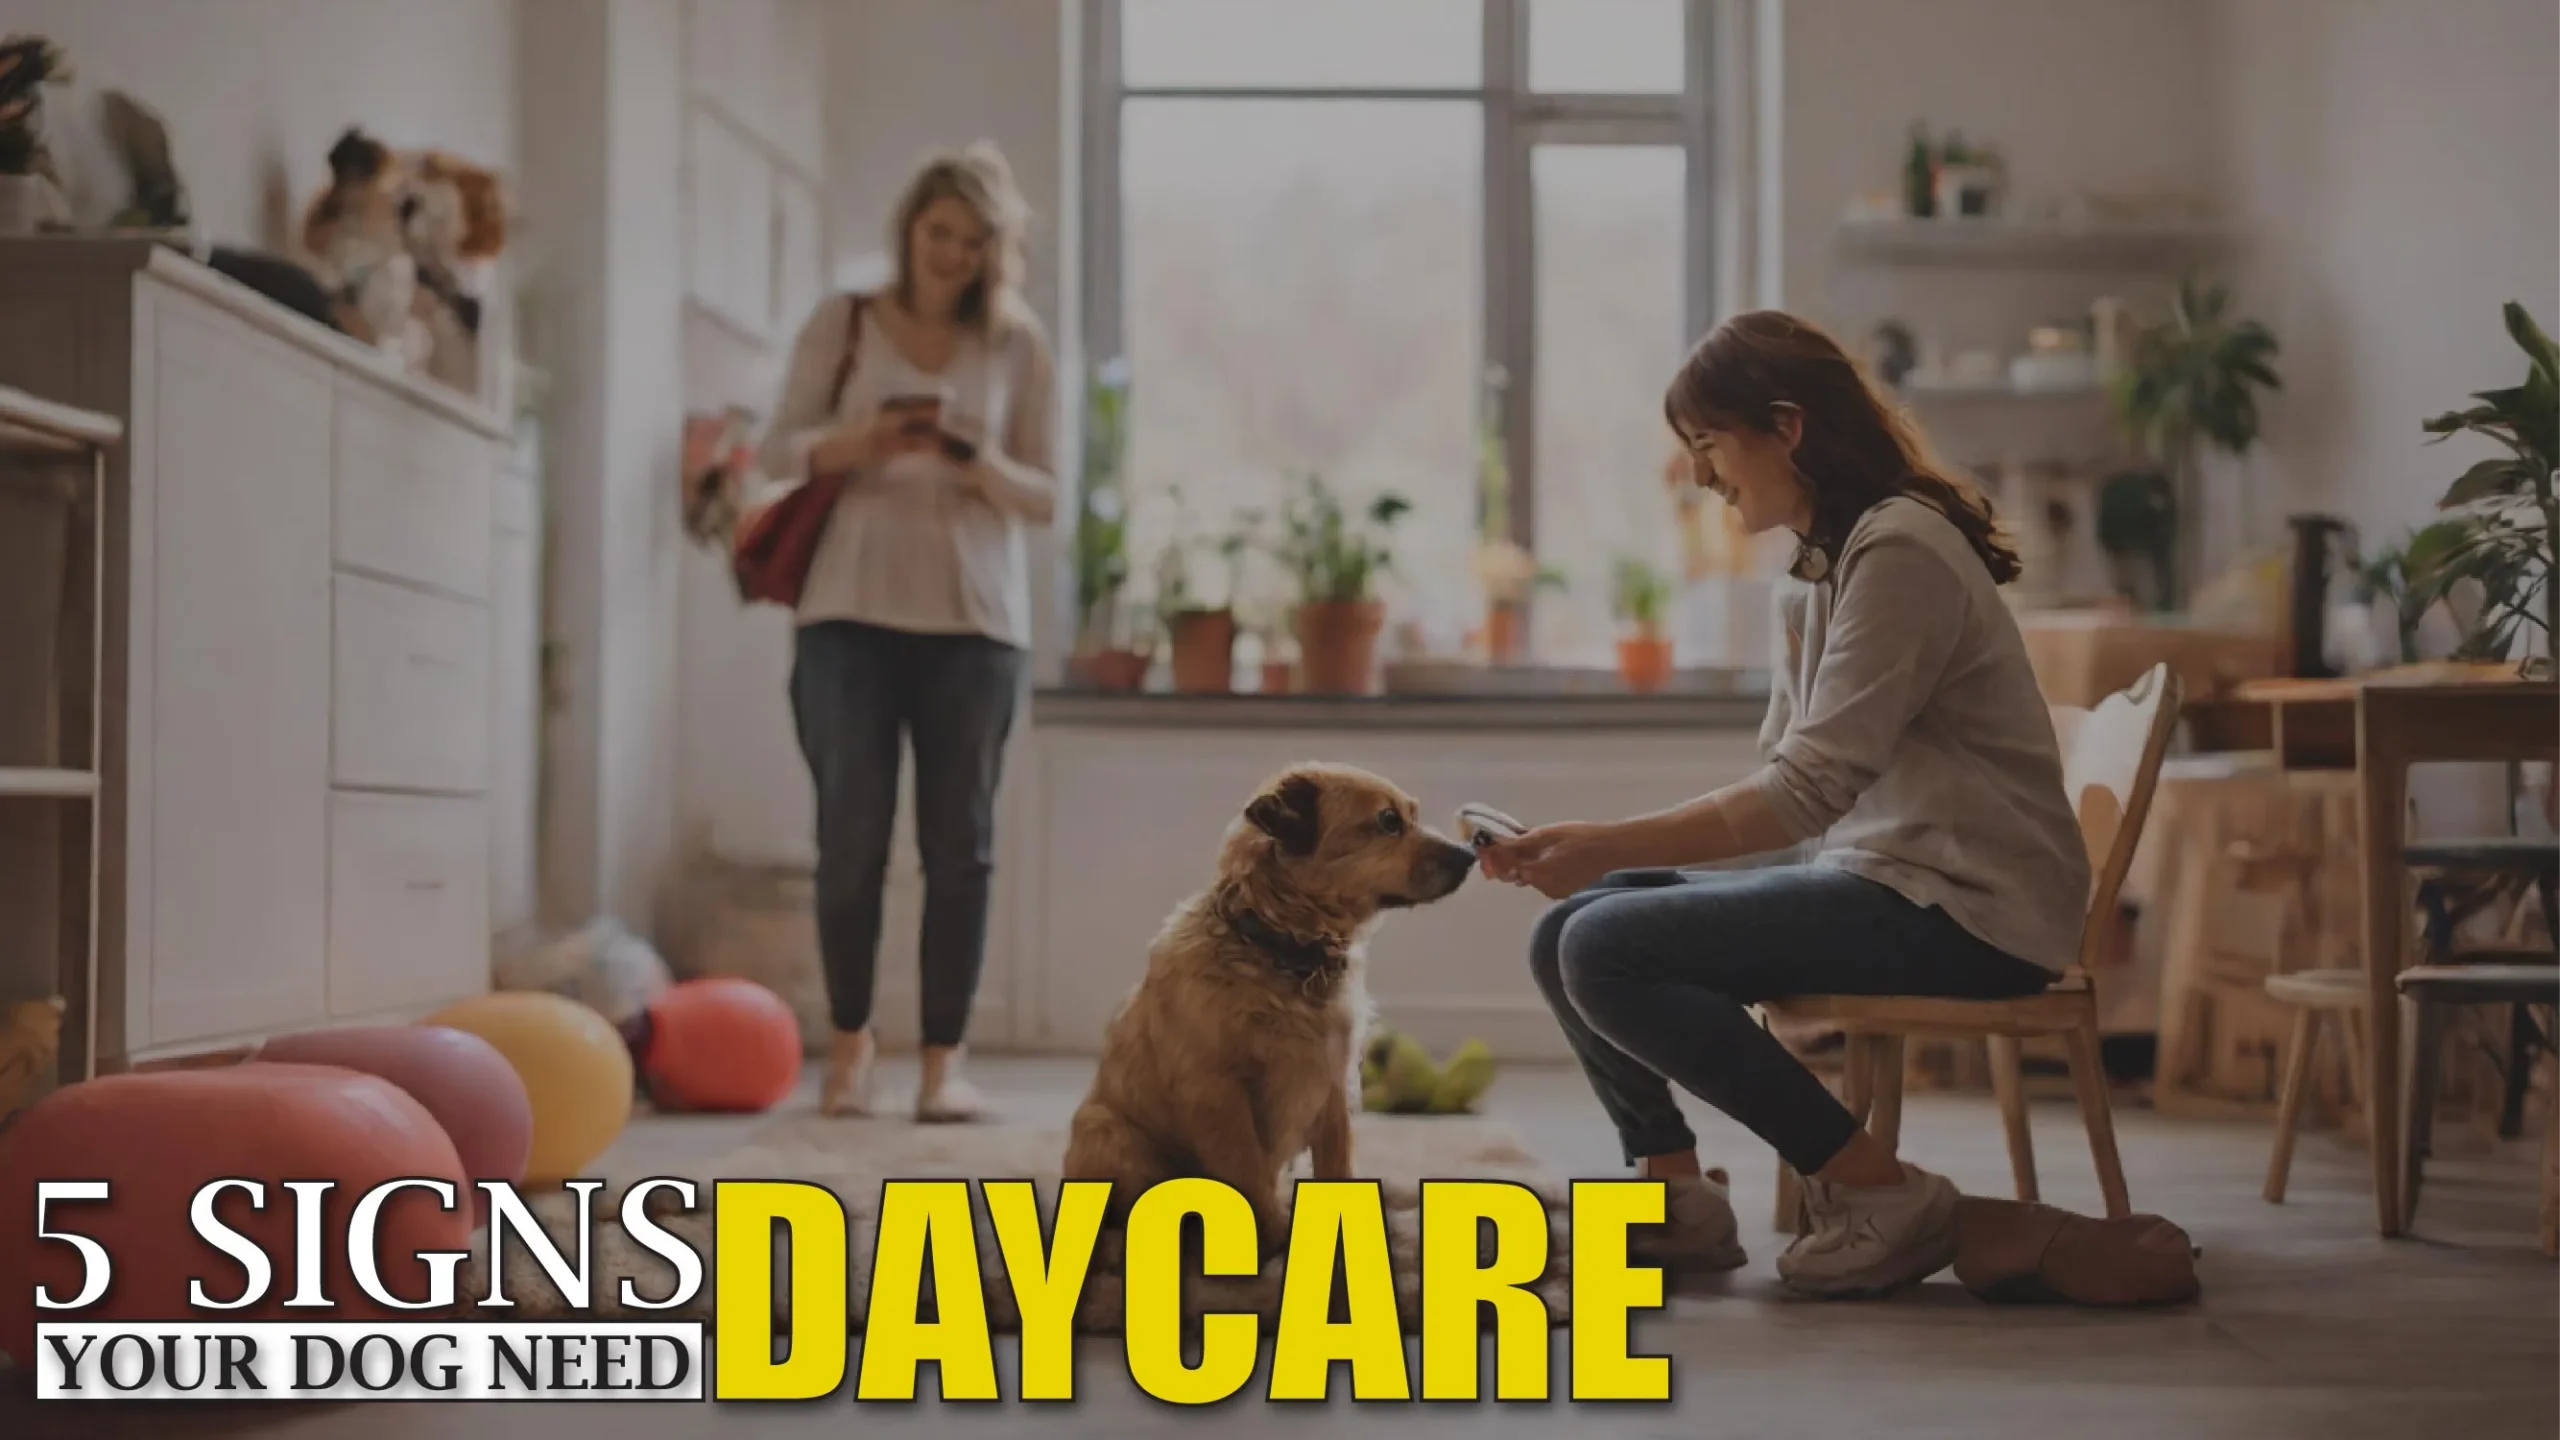 5 Signs Your Dog Needs Daycare